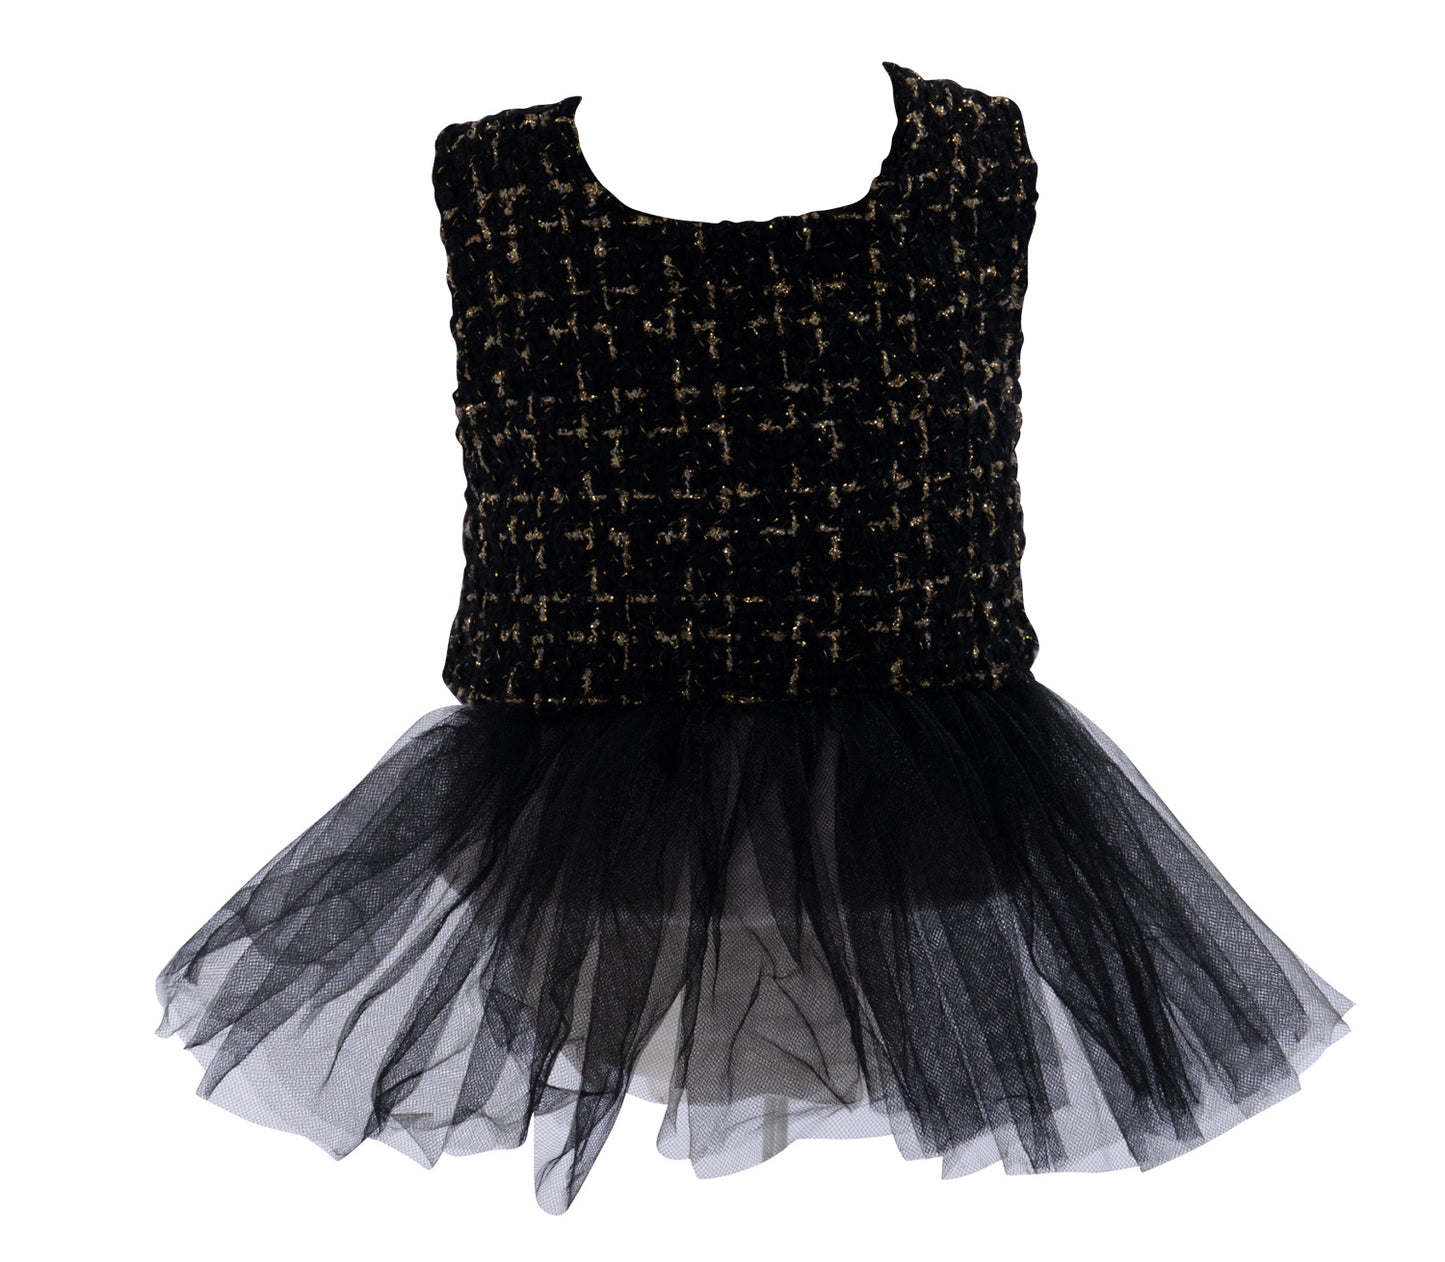 Black and gold pet dress with black tulle ruffle